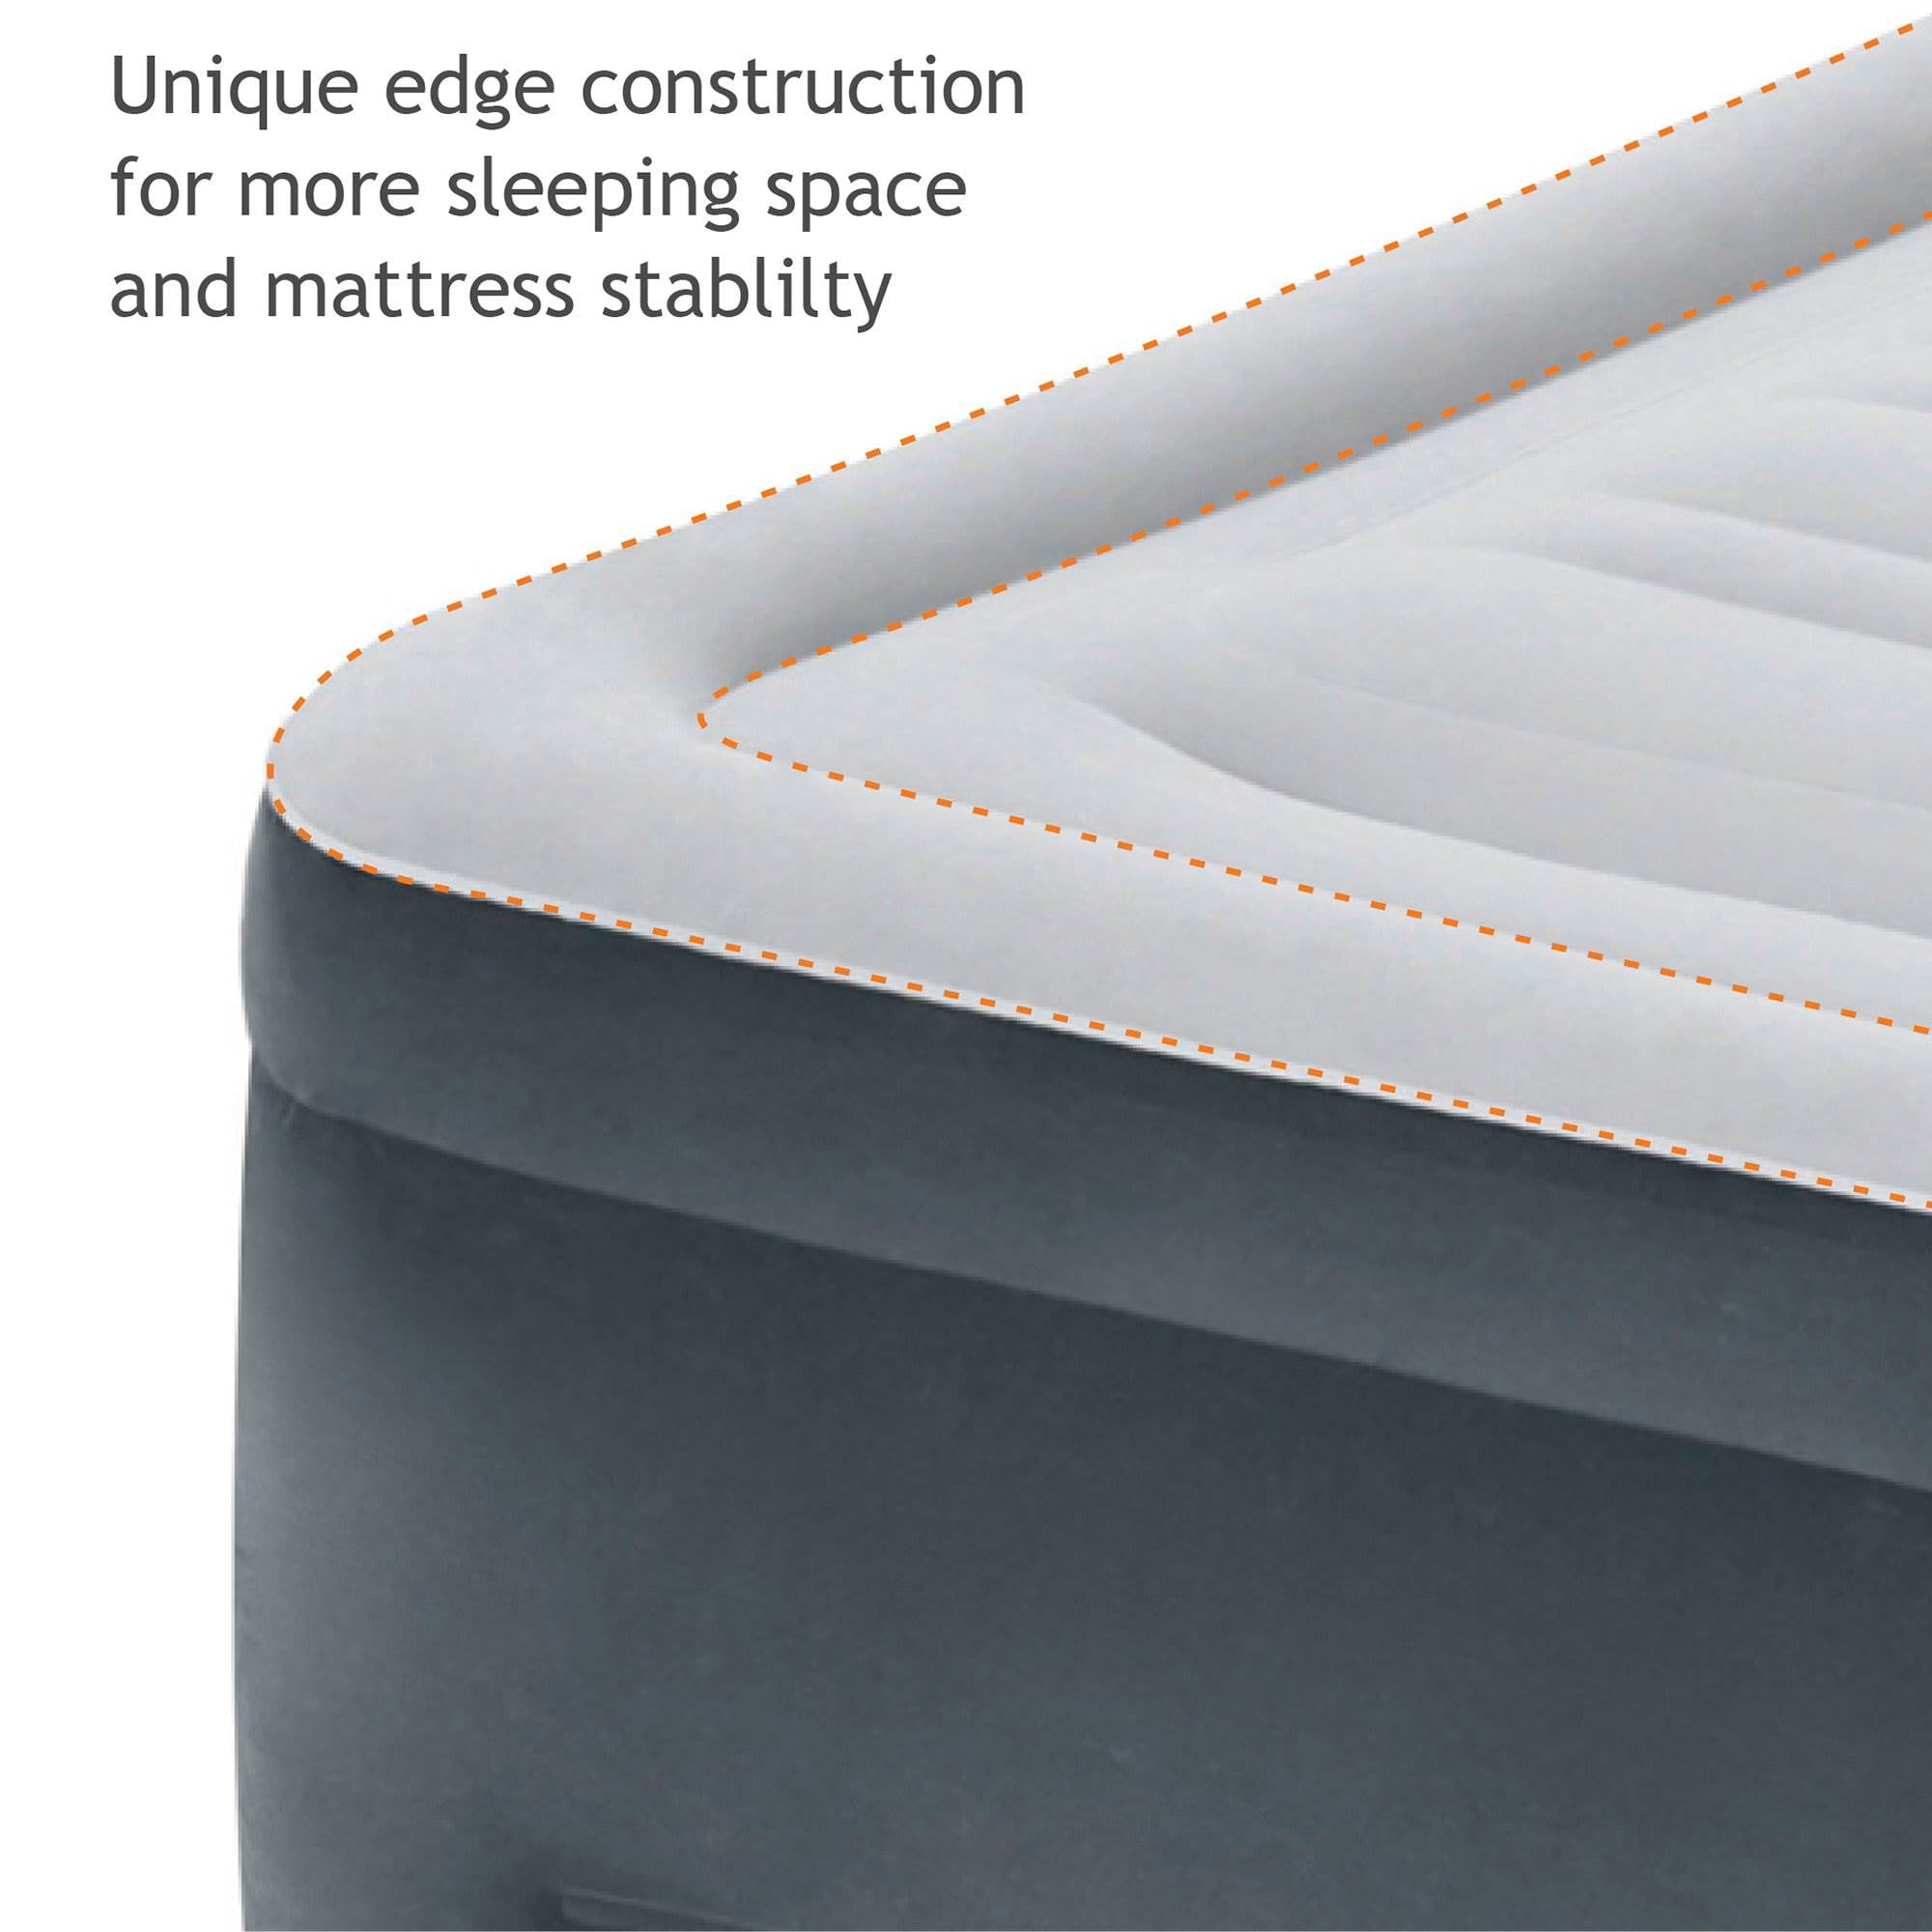 King Details about   Intex 64409VM Dura Beam Plus Elevated Mattress Airbed with Built-In Pump 